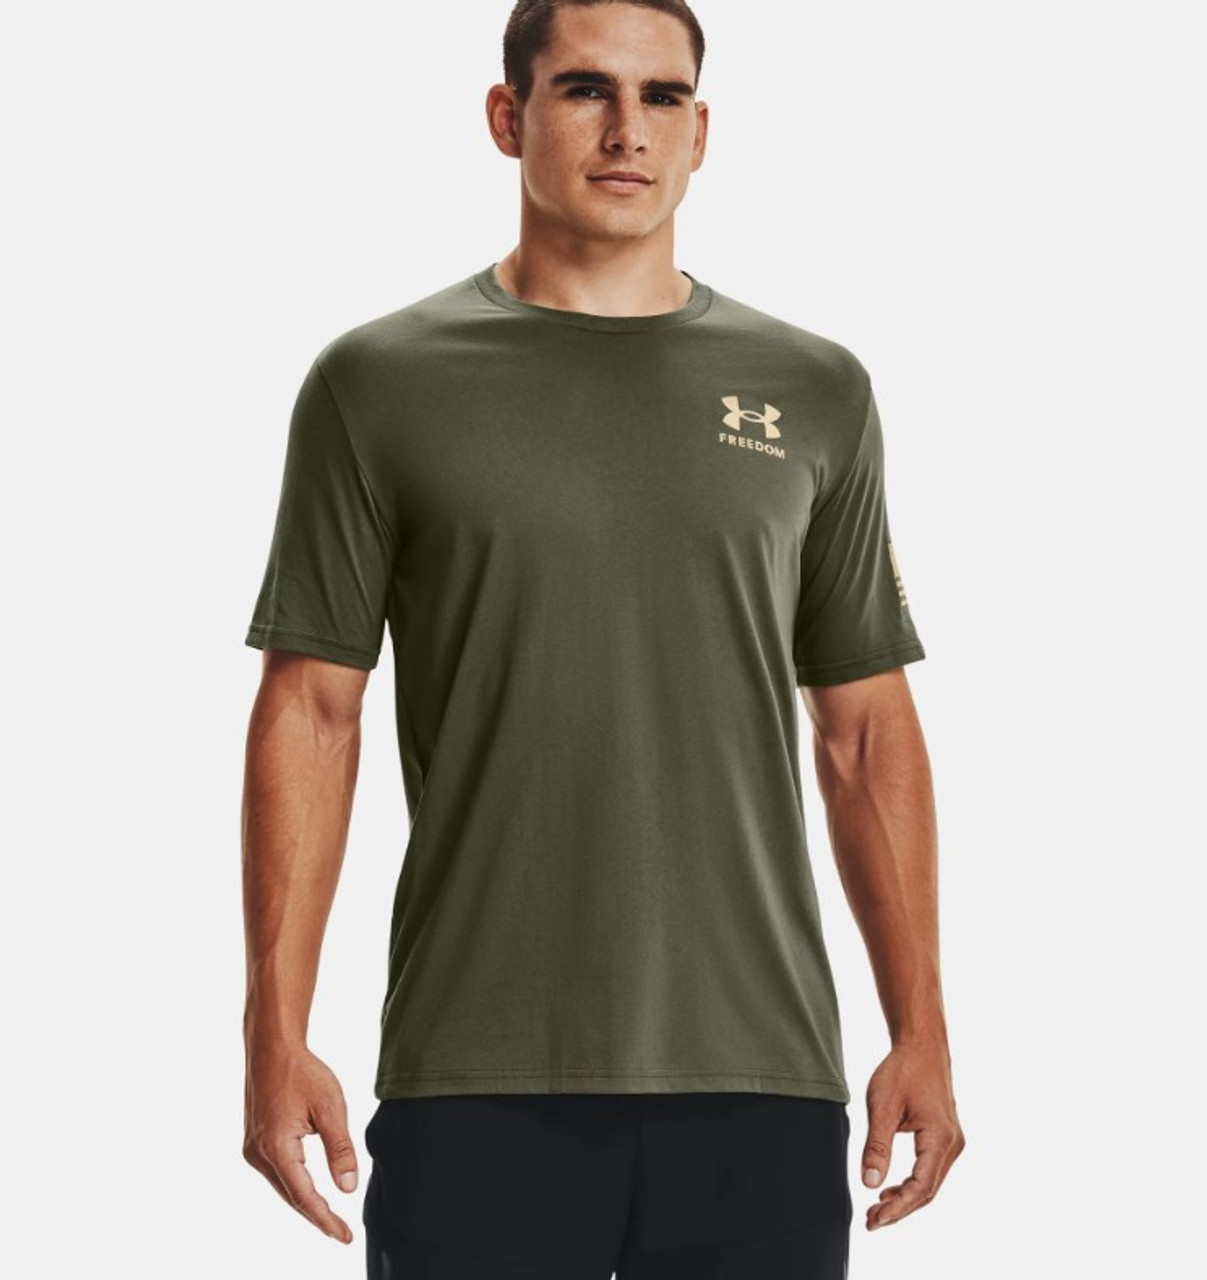 Under Armour Men's New Freedom Flag T-Shirt 